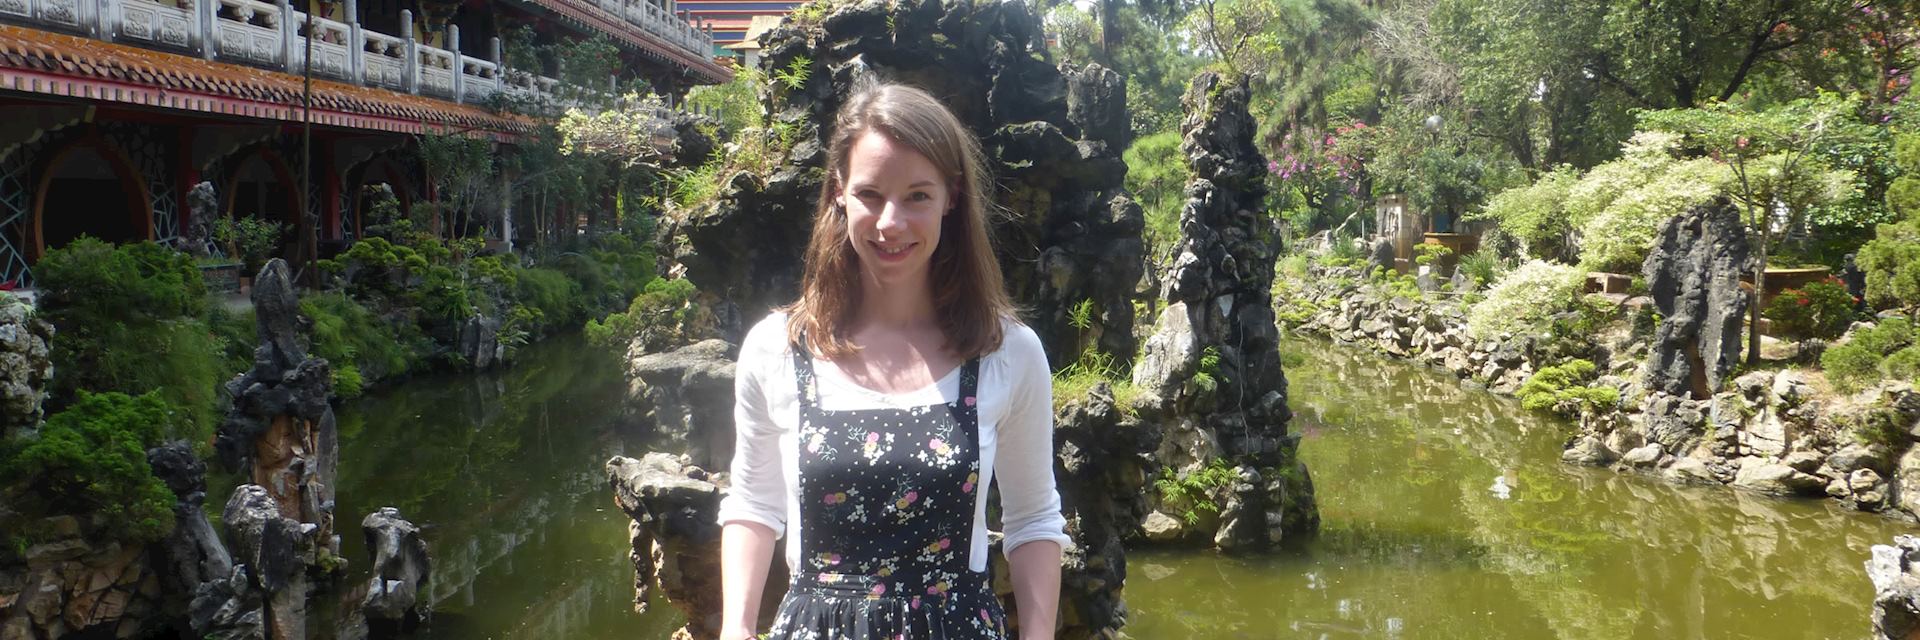 Stella outside the Sam Poh Tong Cave Temple in Ipoh, Malaysia